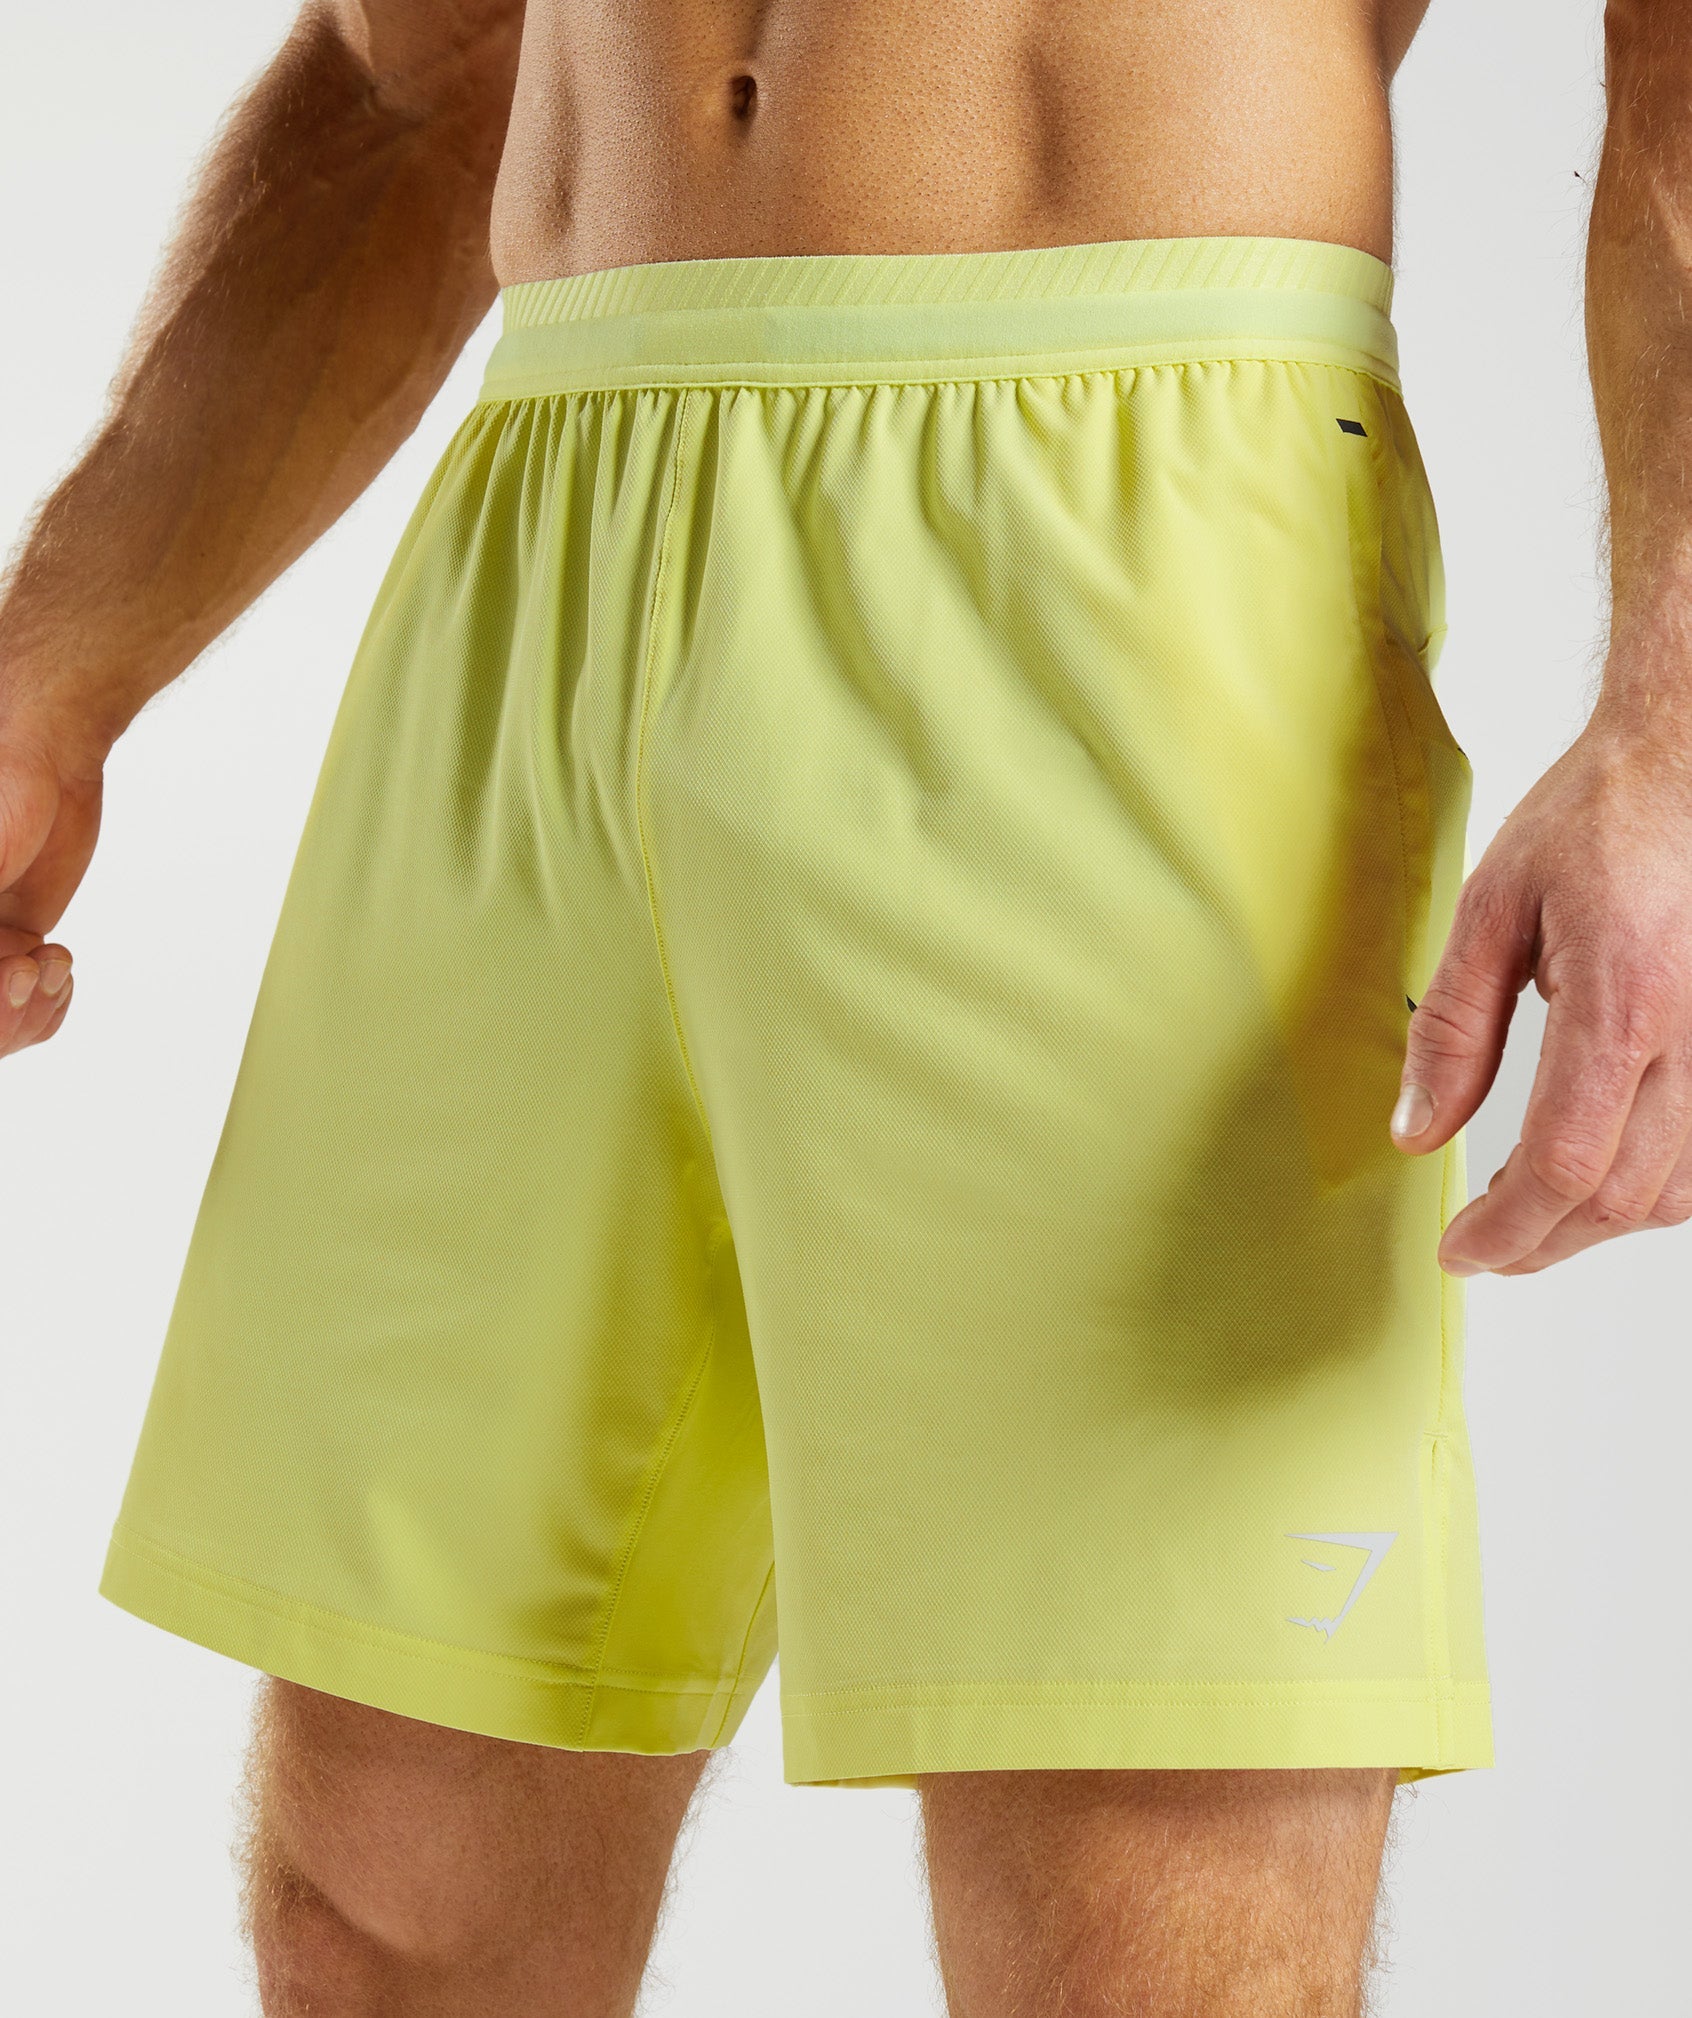 Apex 7" Hybrid Shorts in Firefly Green - view 6